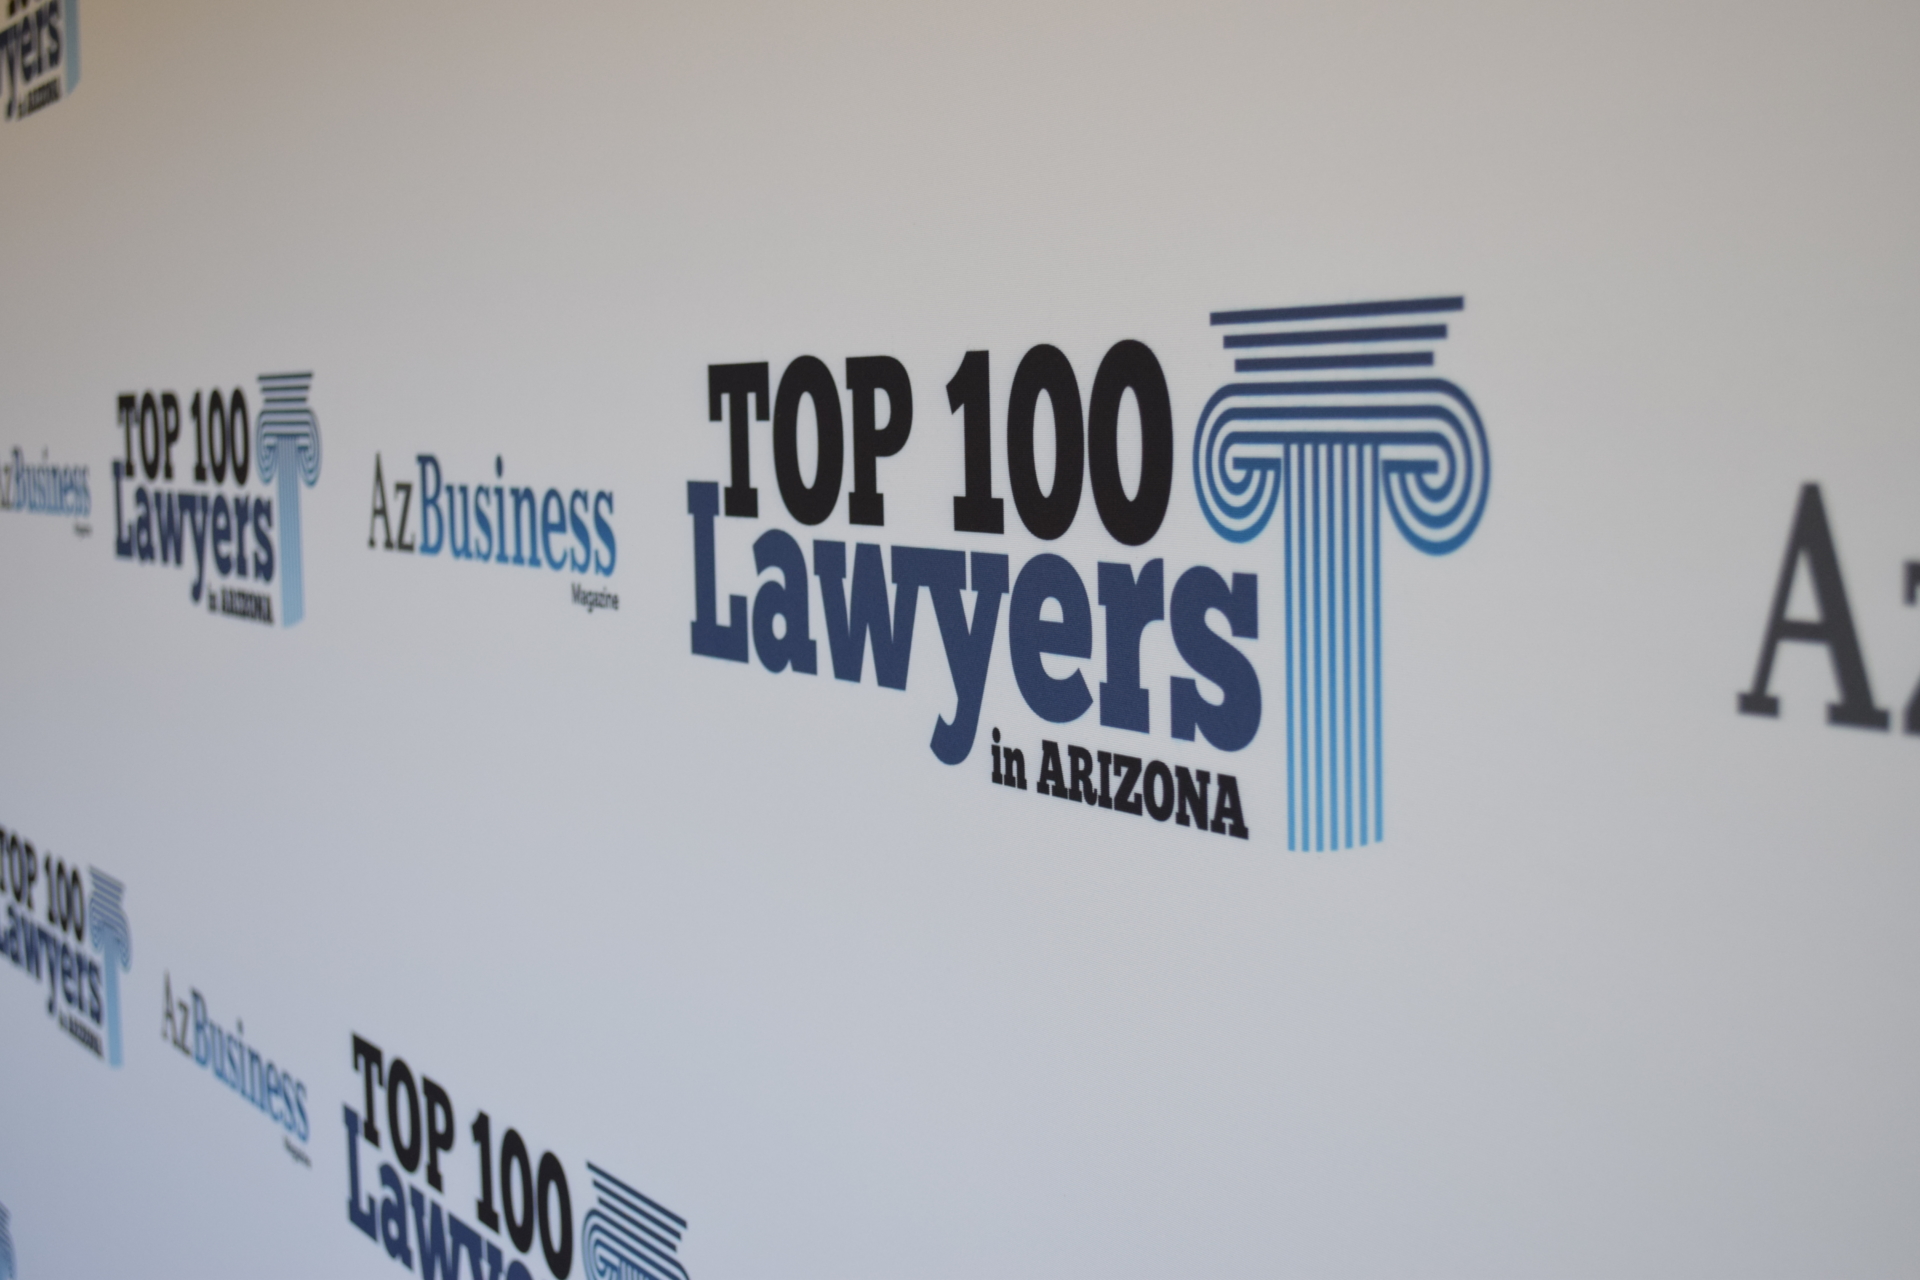 Here are the Top 100 Lawyers in Arizona for 2020 AZ Big Media